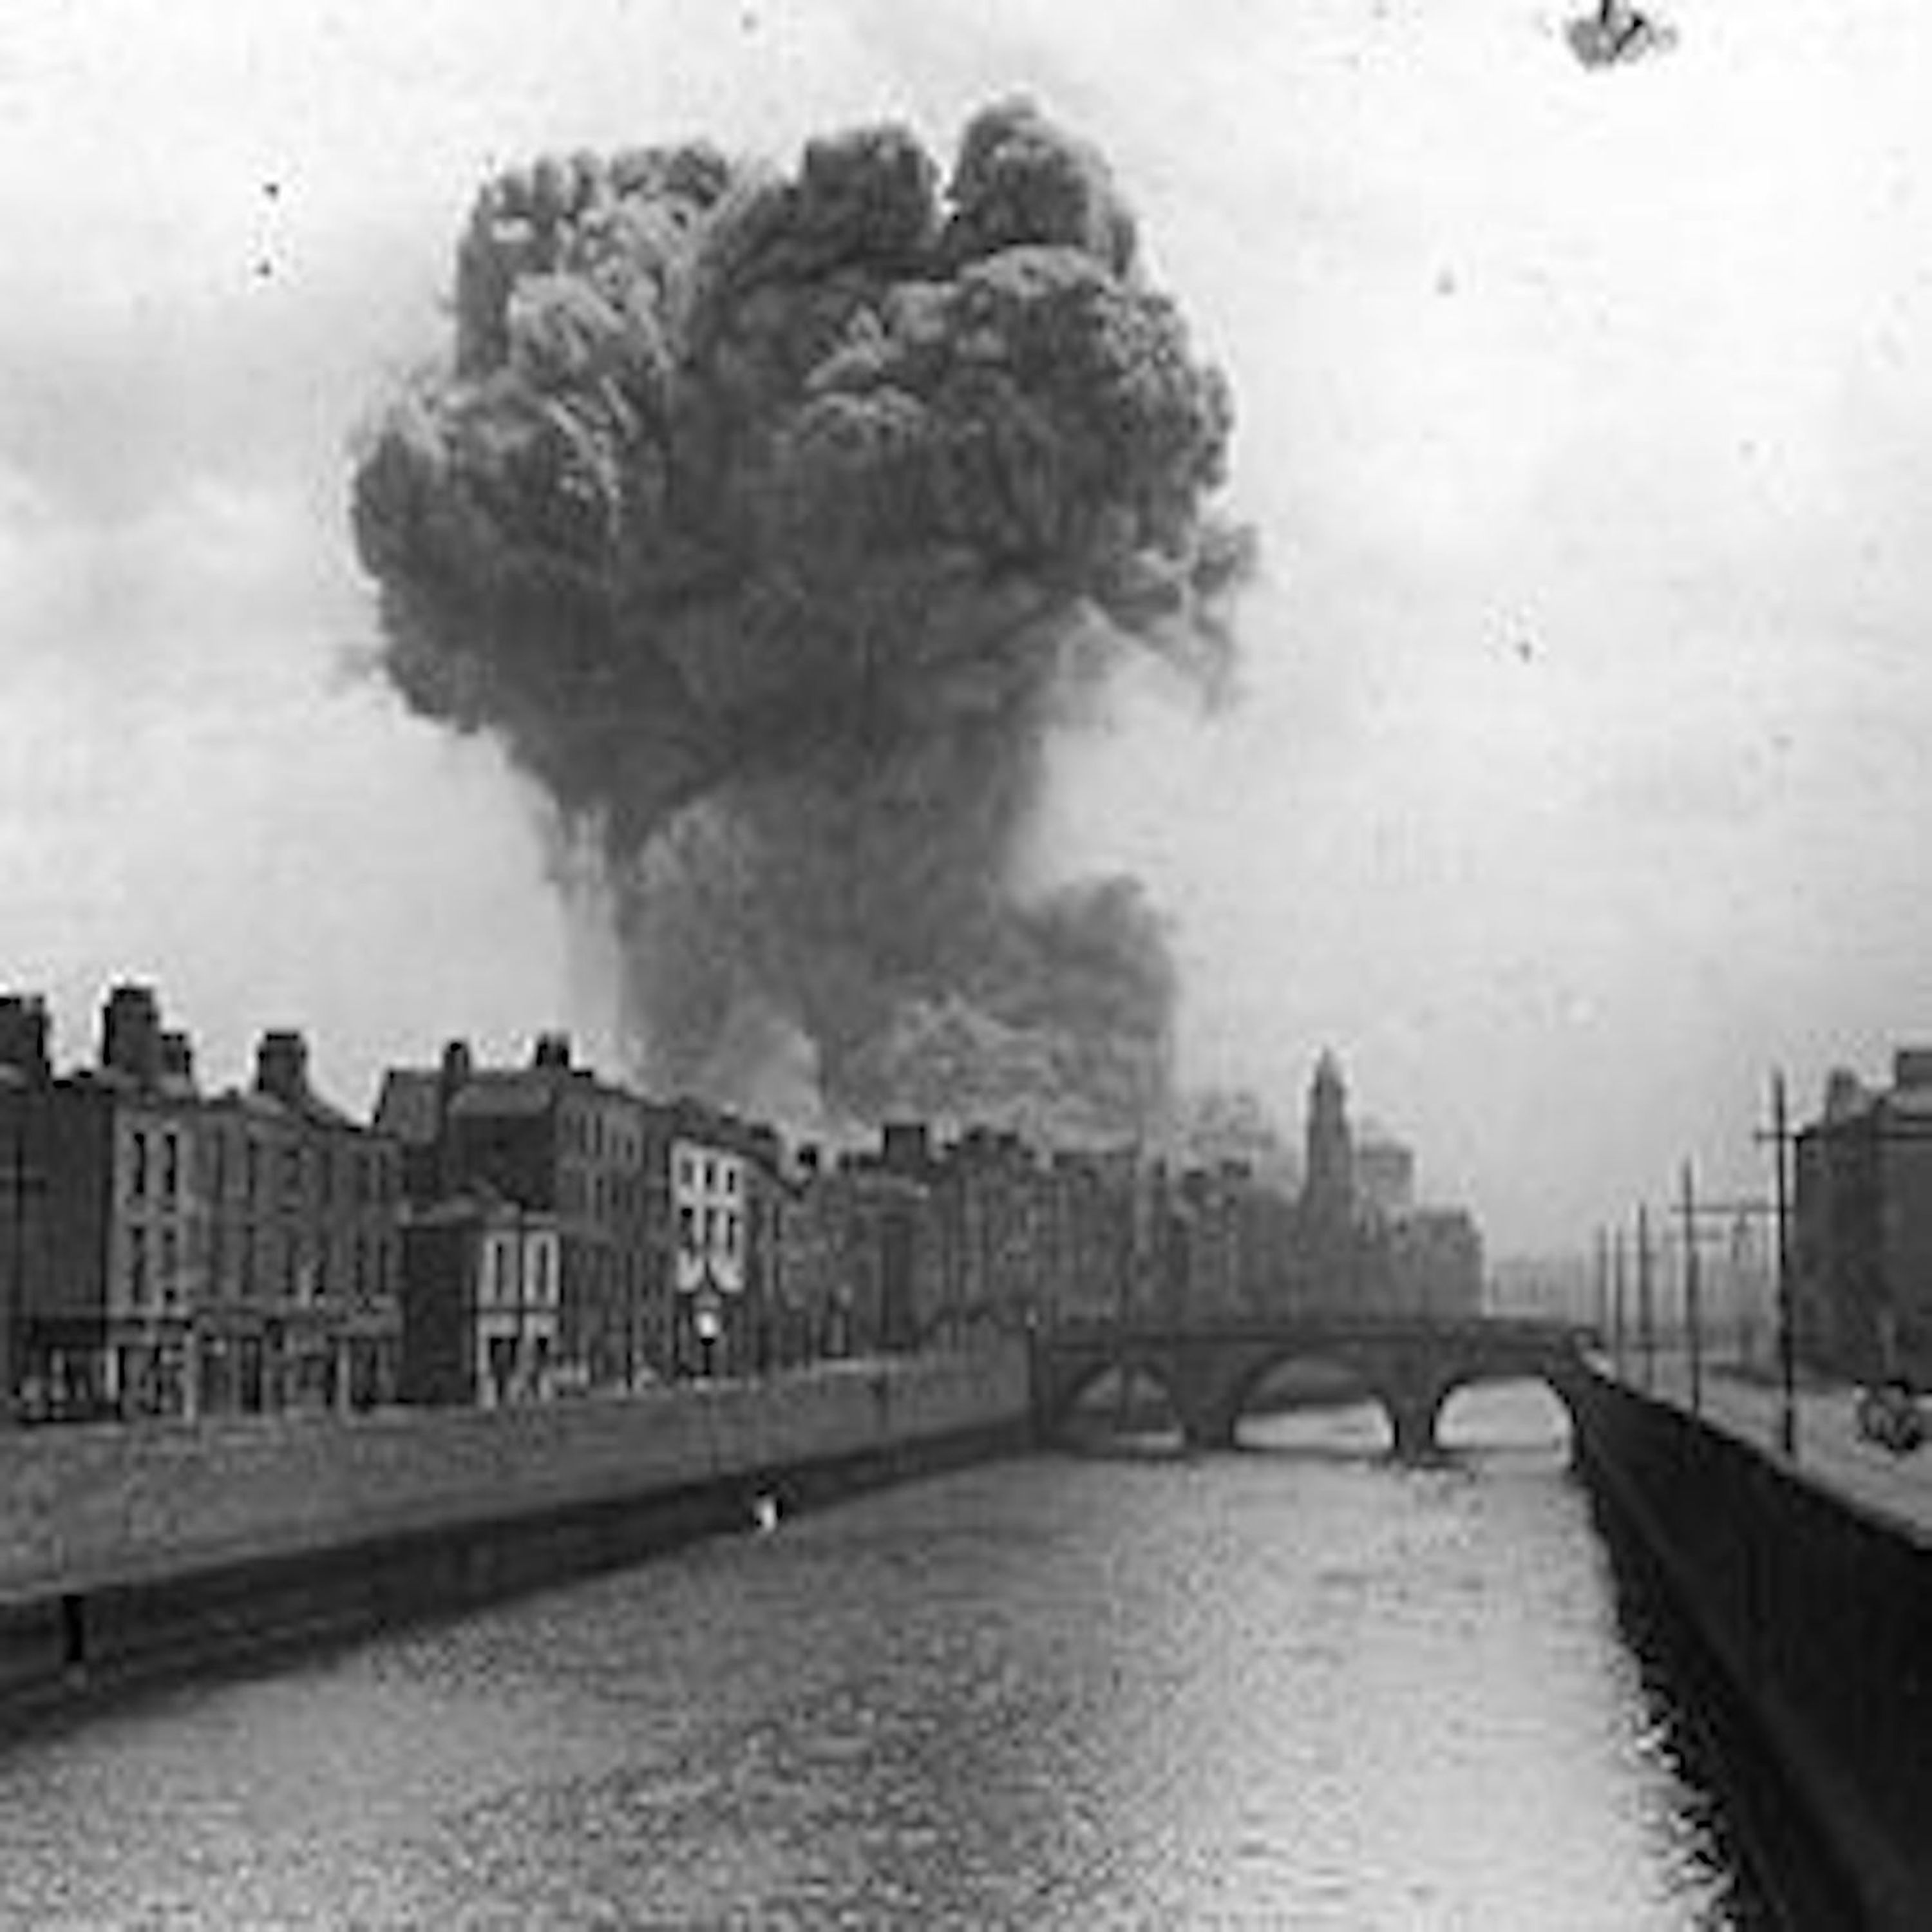 Rescuing History: The Four Courts Explosion